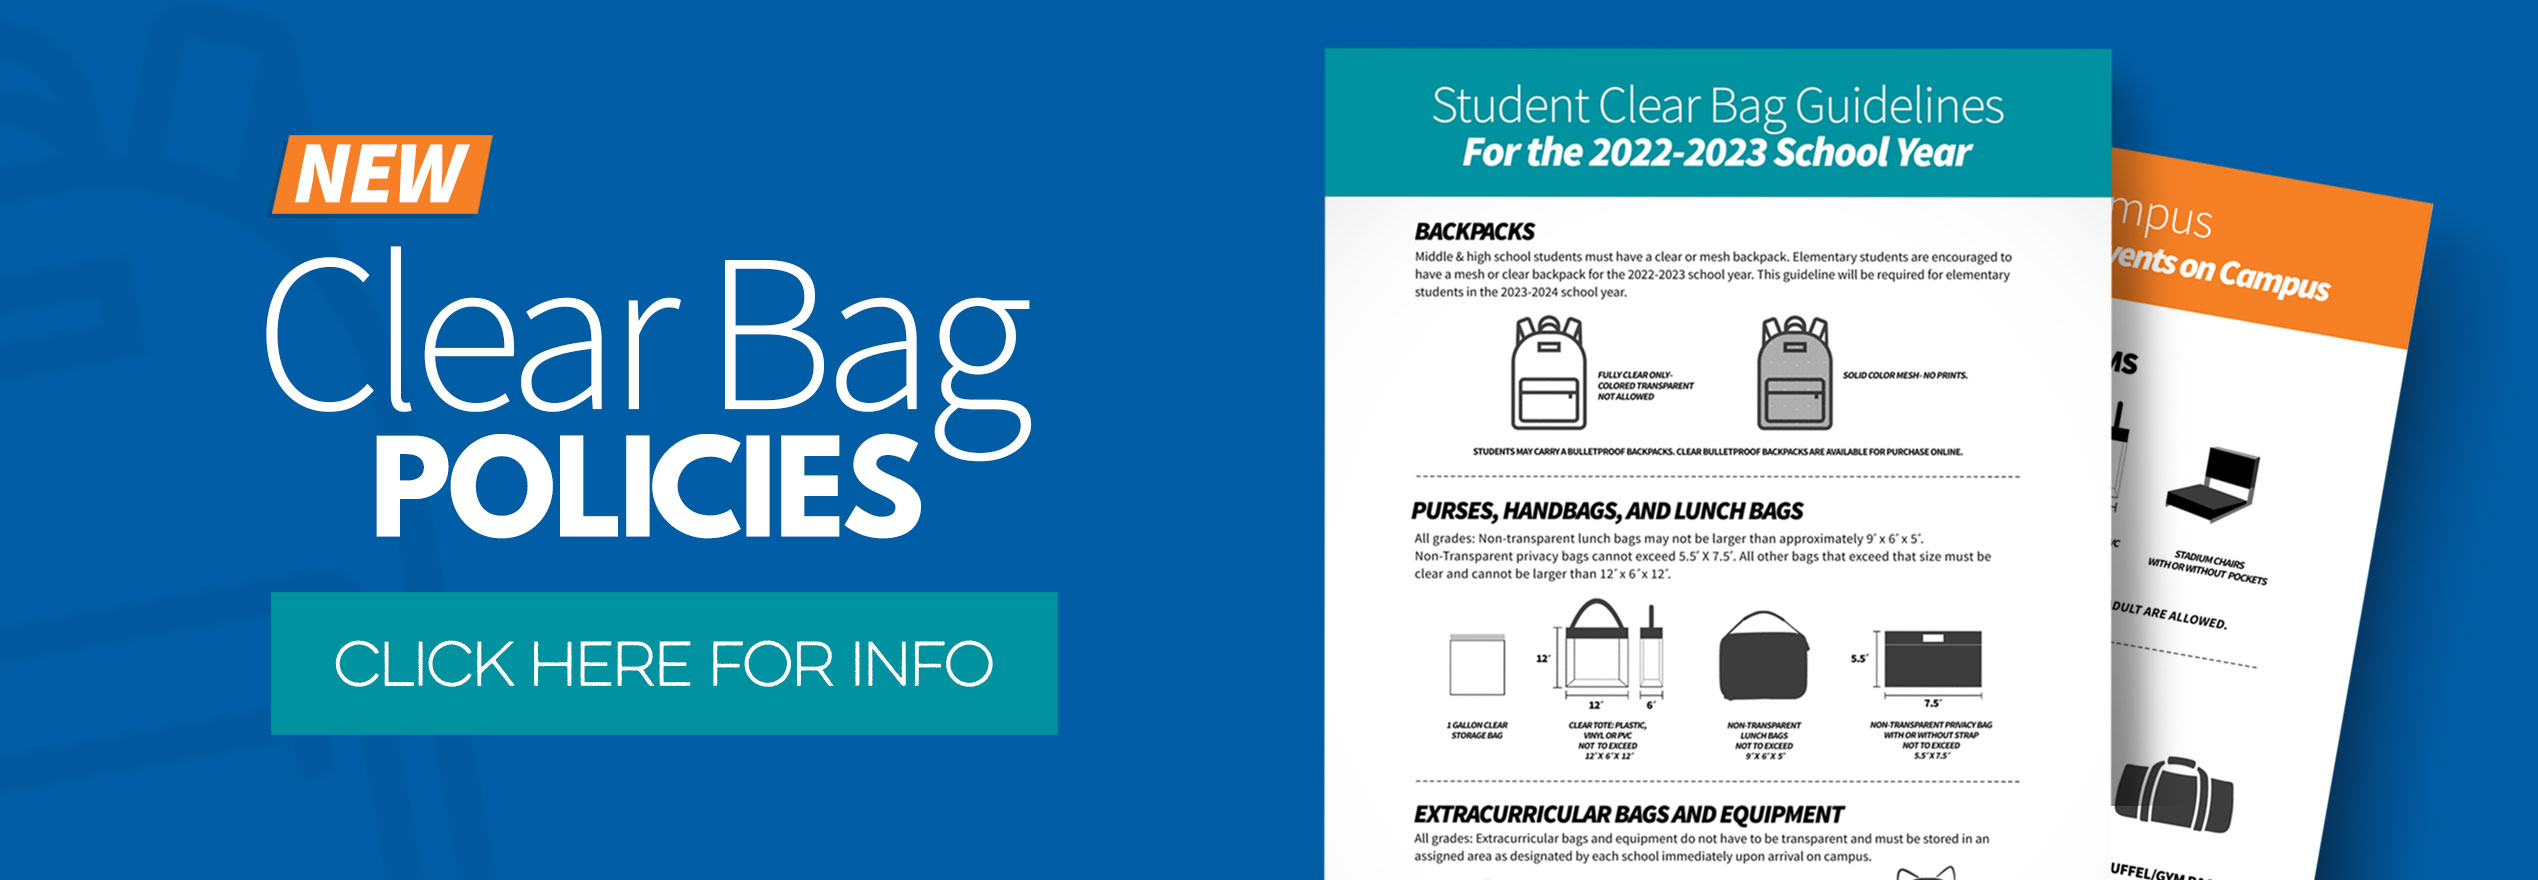 Clear Bag Policies information